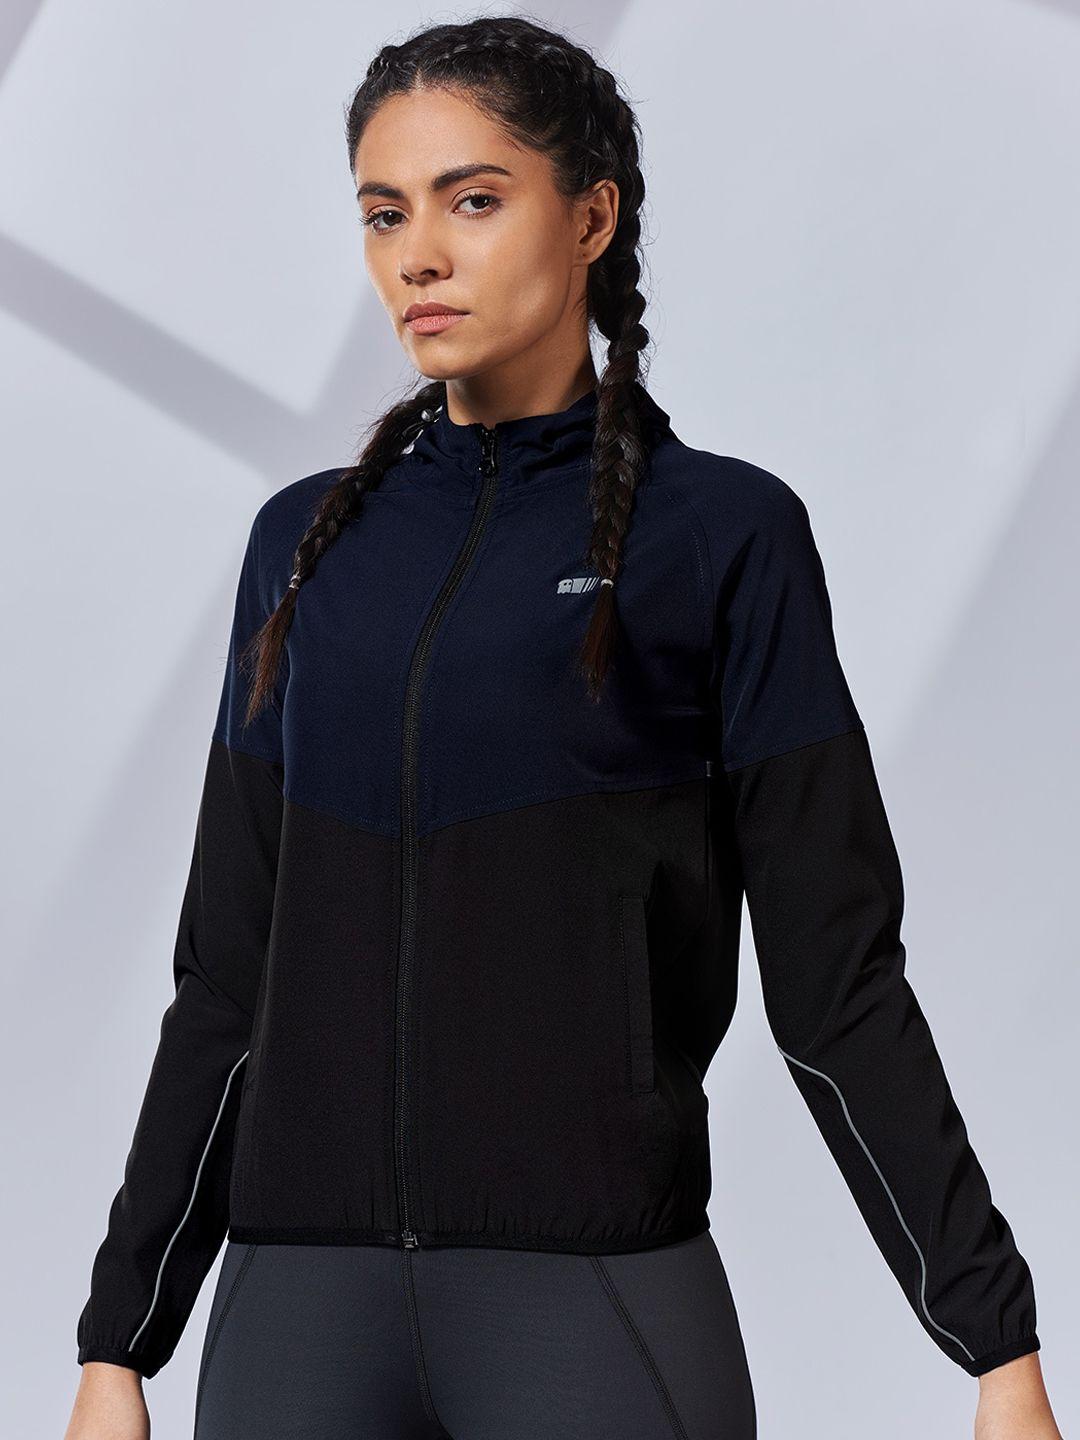 the souled store women colourblocked activewear running jacket